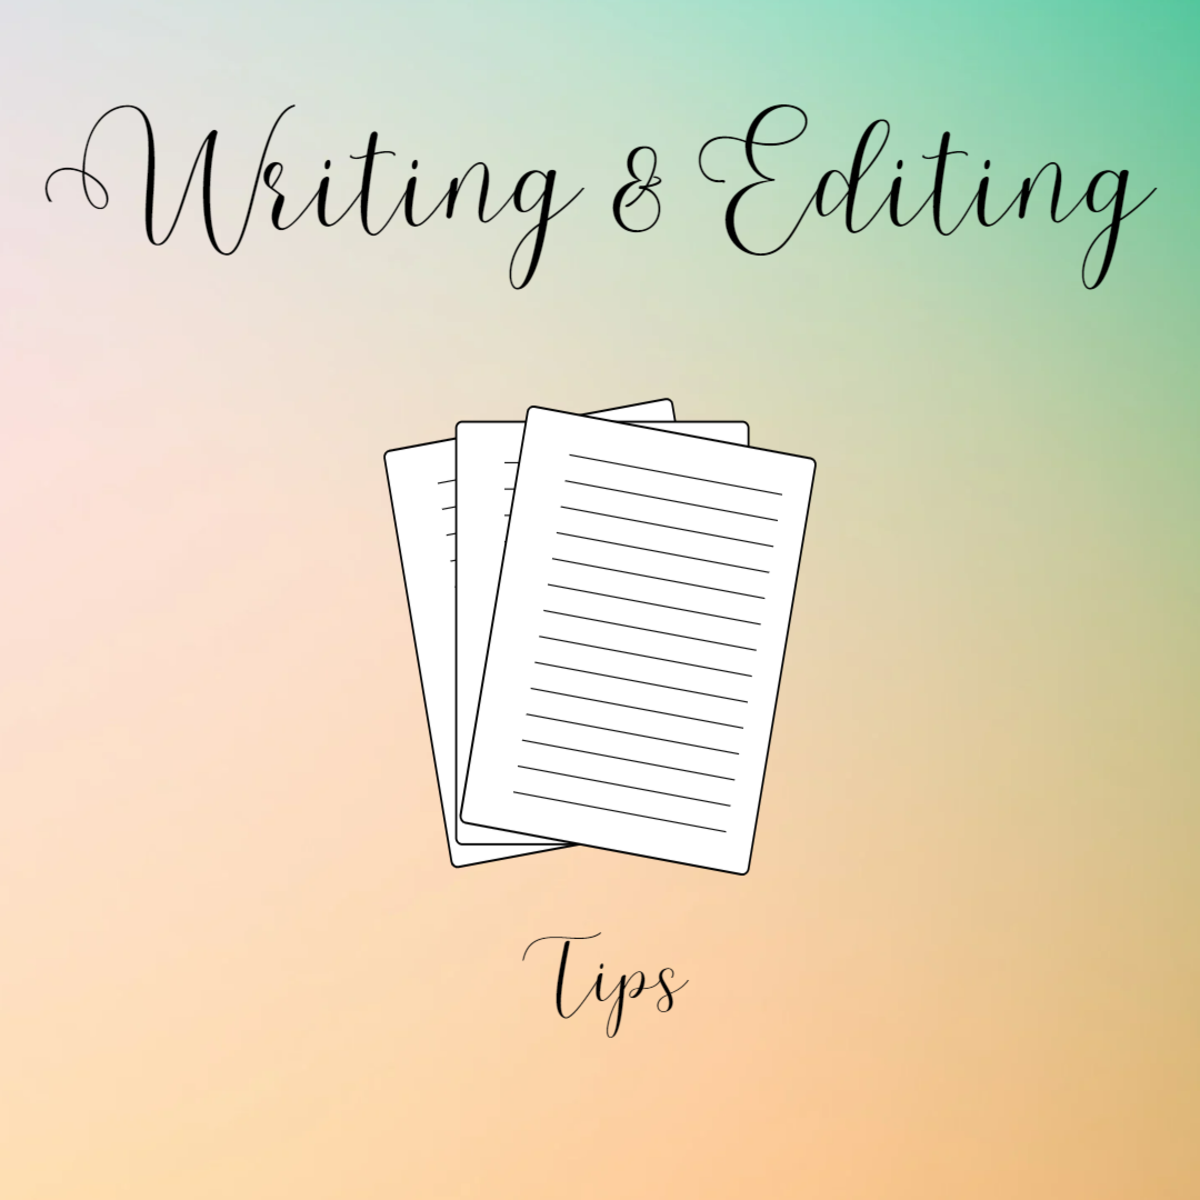 More Editing and Revision Tips for Your Work